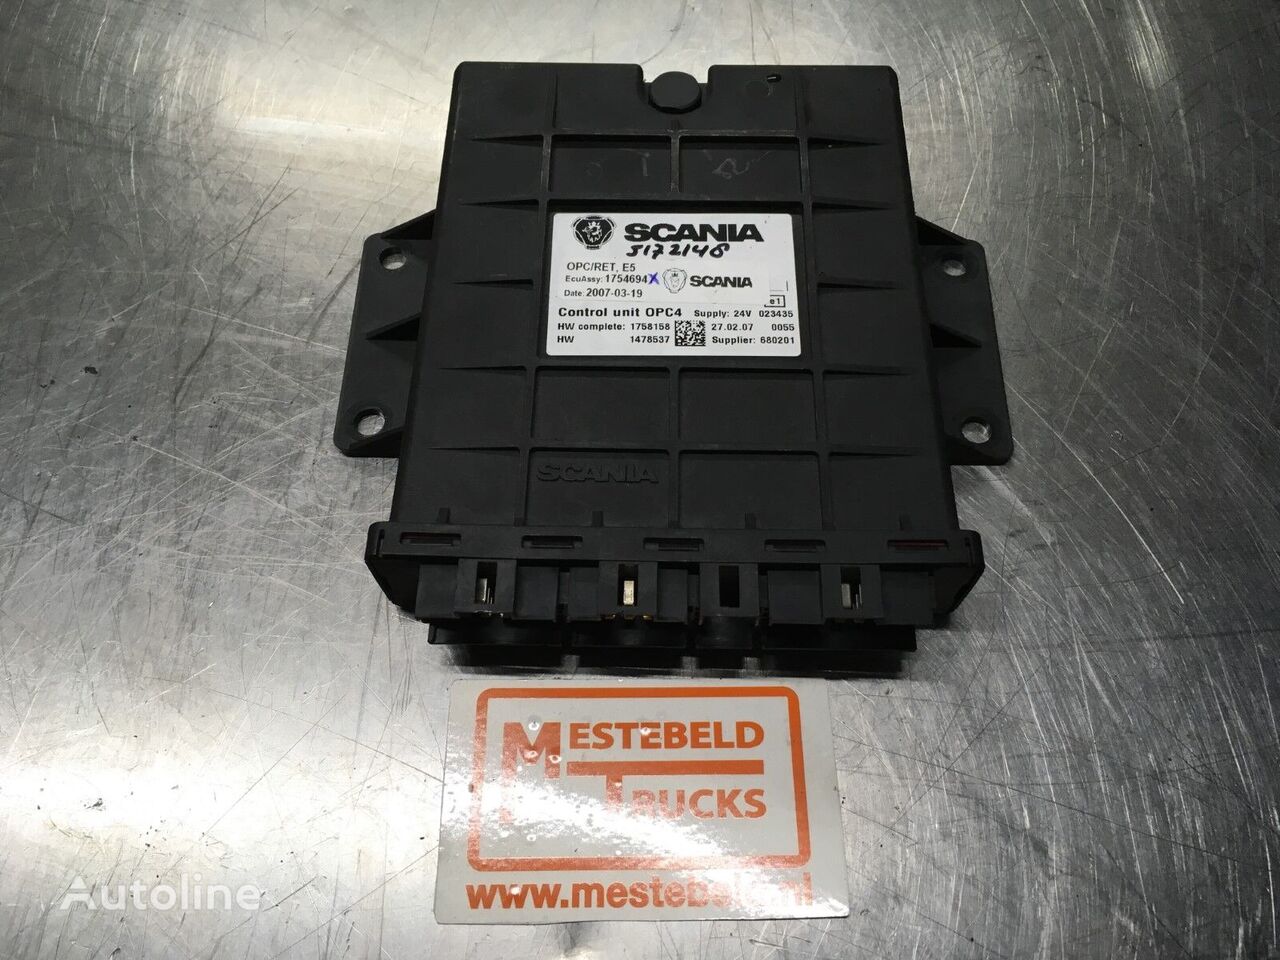 Scania Stuurkast OPC4 1754694 control unit for Scania R truck